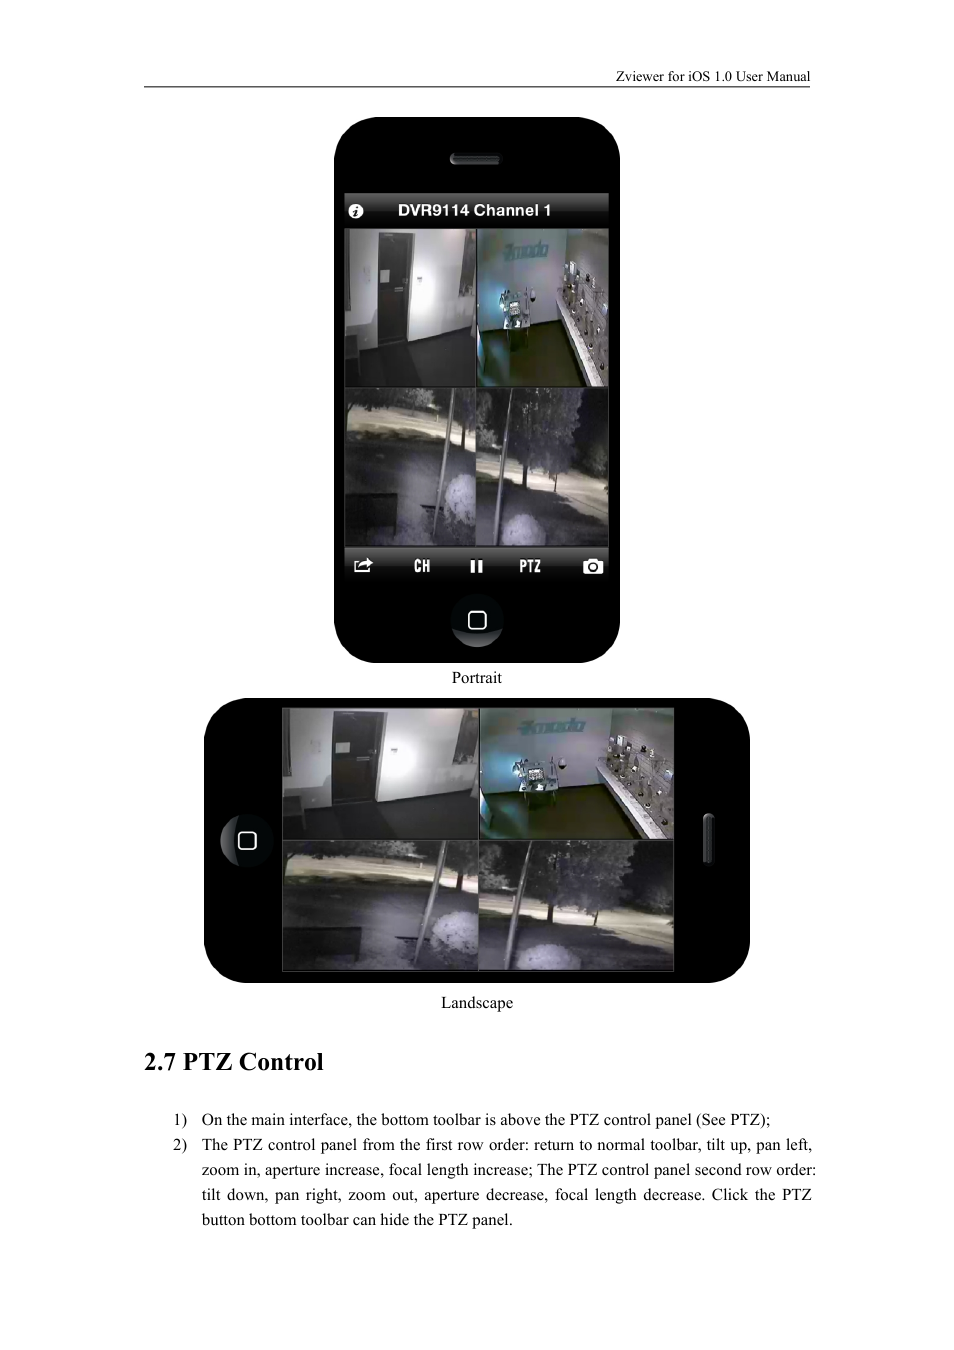 7ptzcontrol, 7 ptz control | ZMODO ZP-KC1H04-P 4 Channel 720P PoE NVR System - Zviewer iOS User Manual User Manual | Page 14 / 15